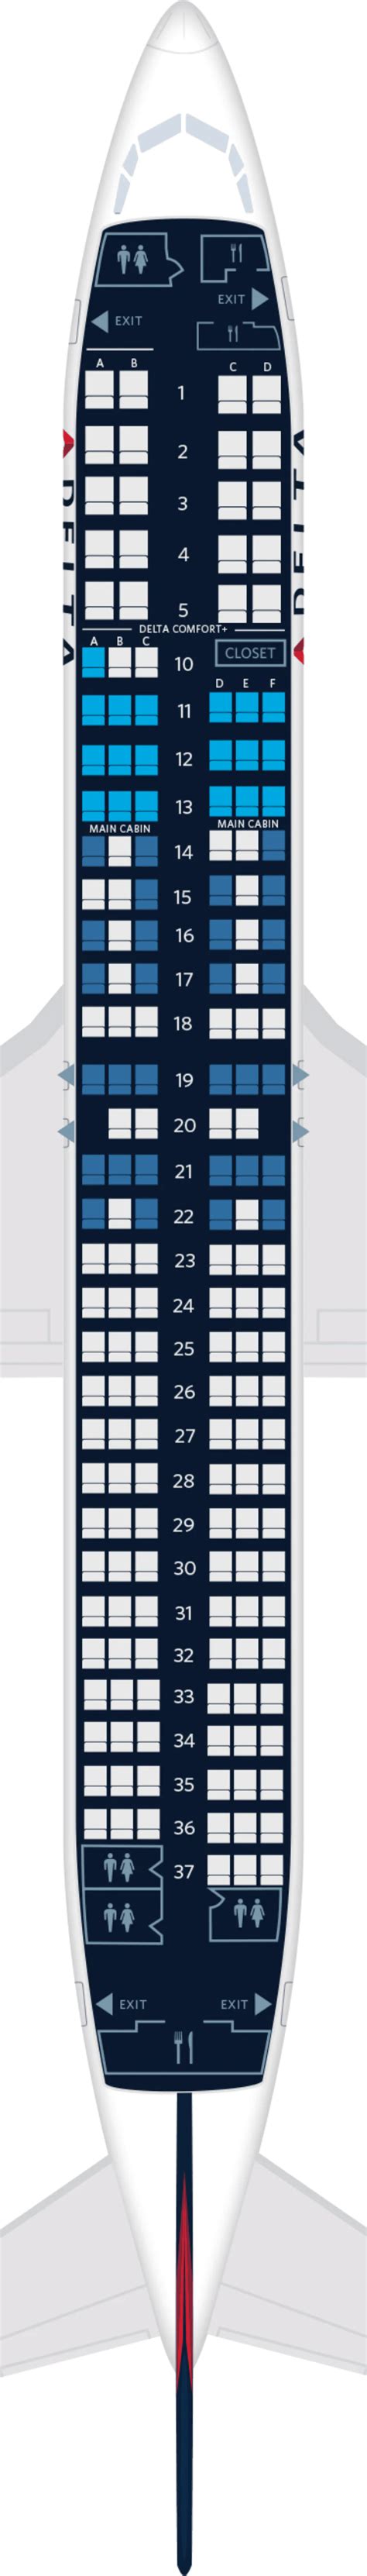 United Airlines 737 900 Seat Map